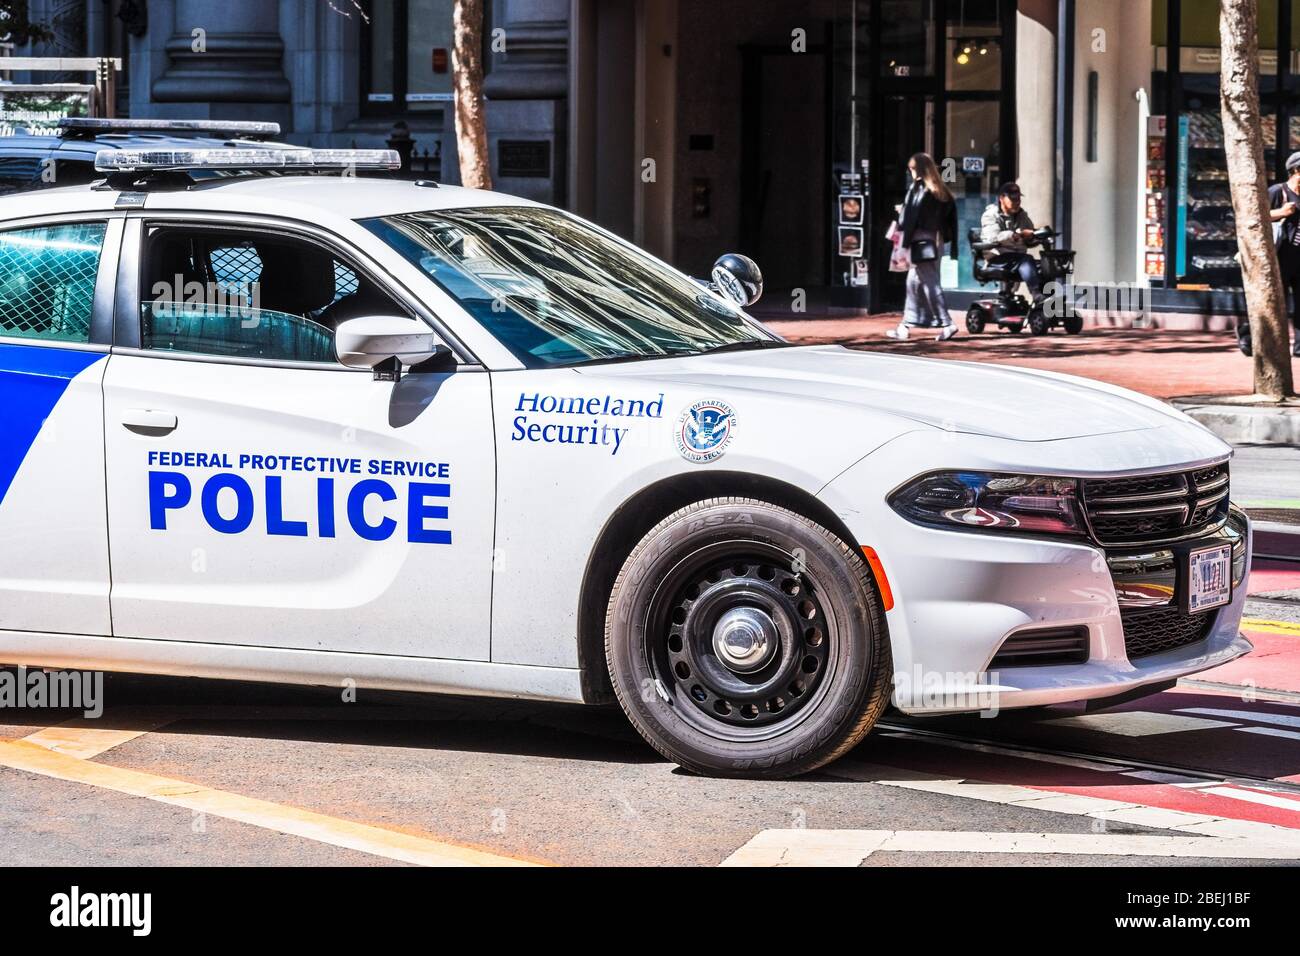 Sep 20, 2019 San Francisco / CA / USA - Homeland Security vehicle offering security a rally in downtown San Francisco Stock Photo